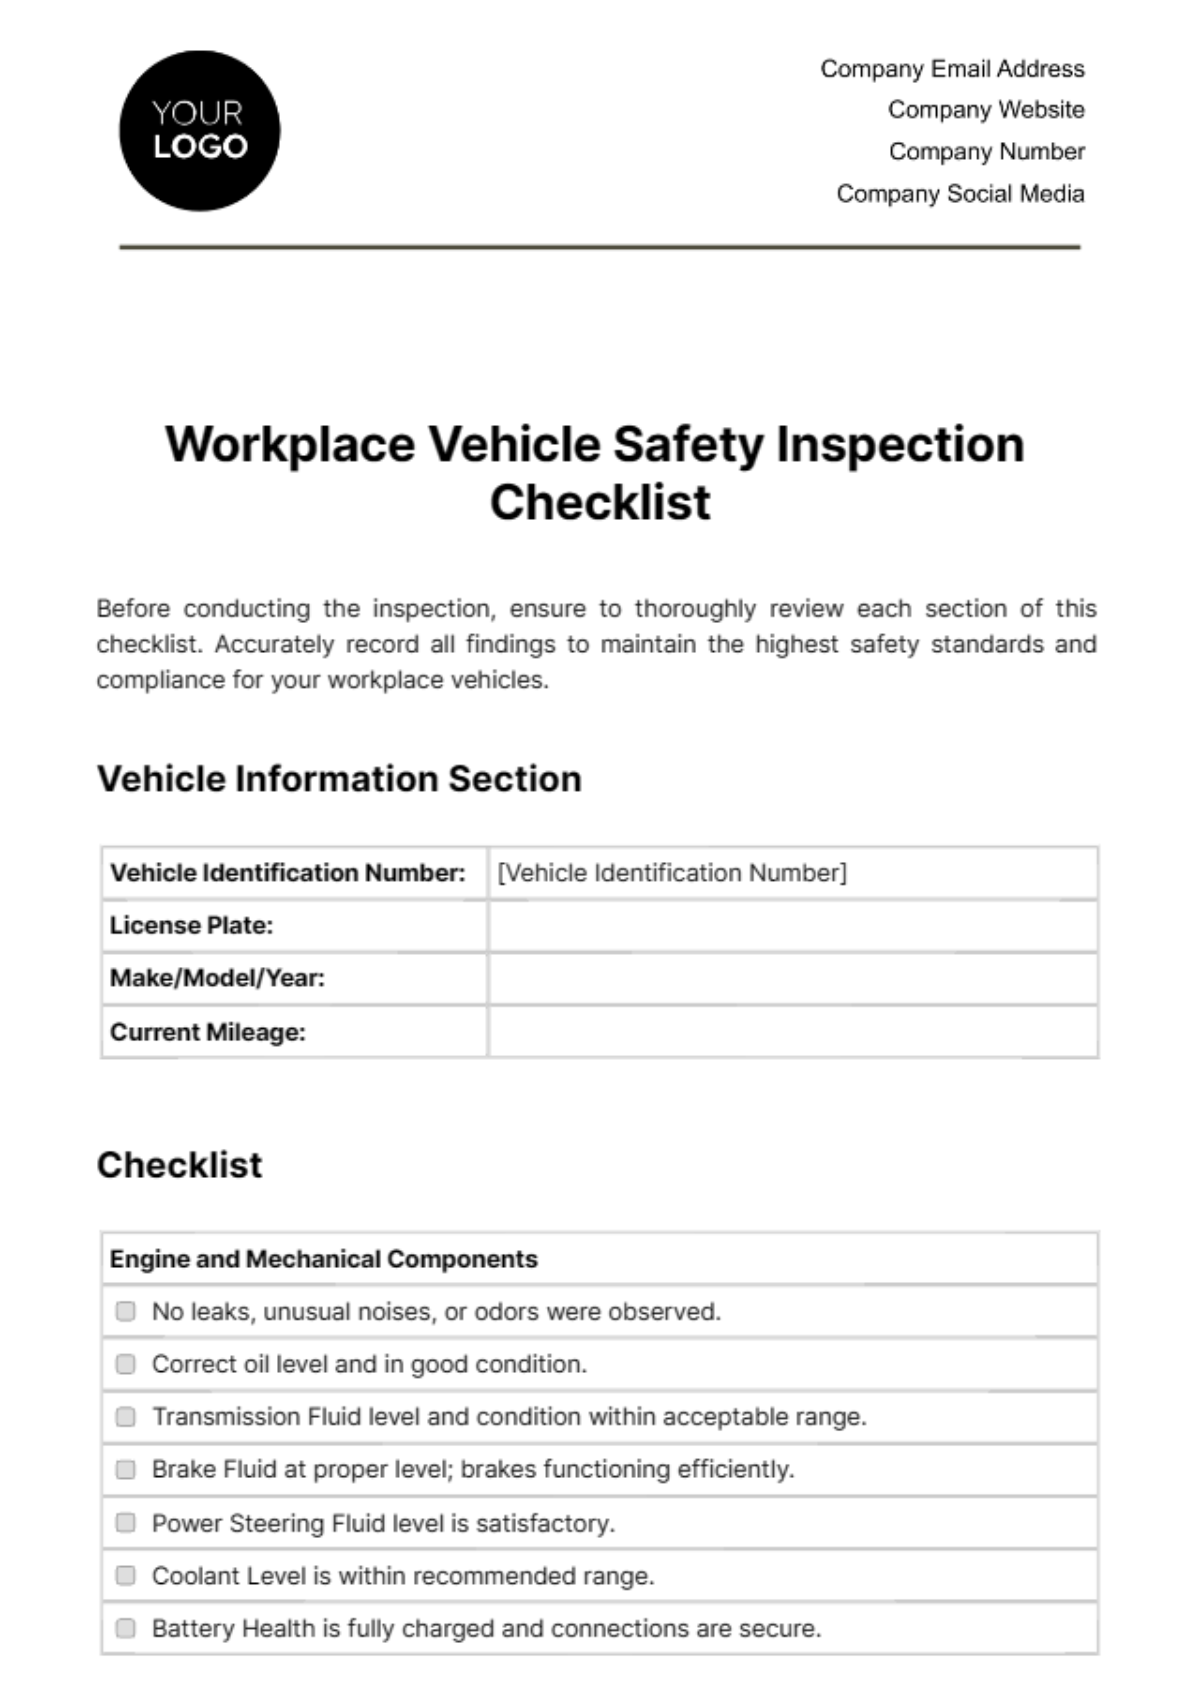 Workplace Vehicle Safety Inspection Checklist Template